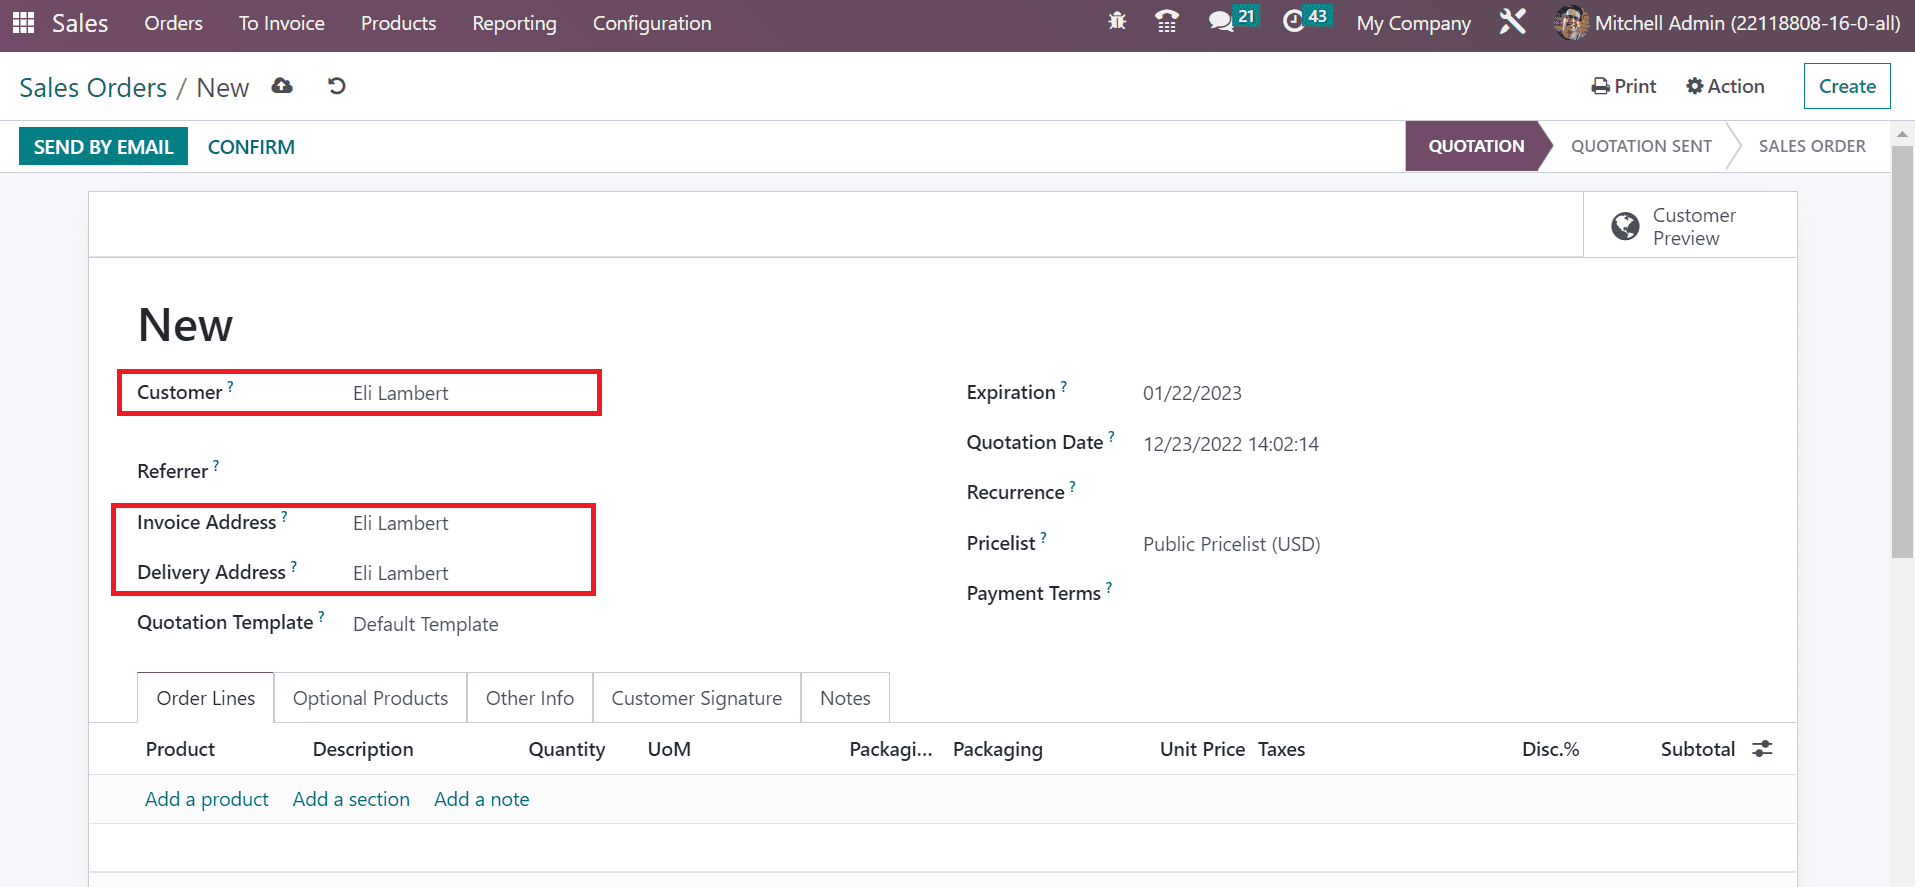 How to Manage Sales Return for an Order Using Odoo 16 Sales App